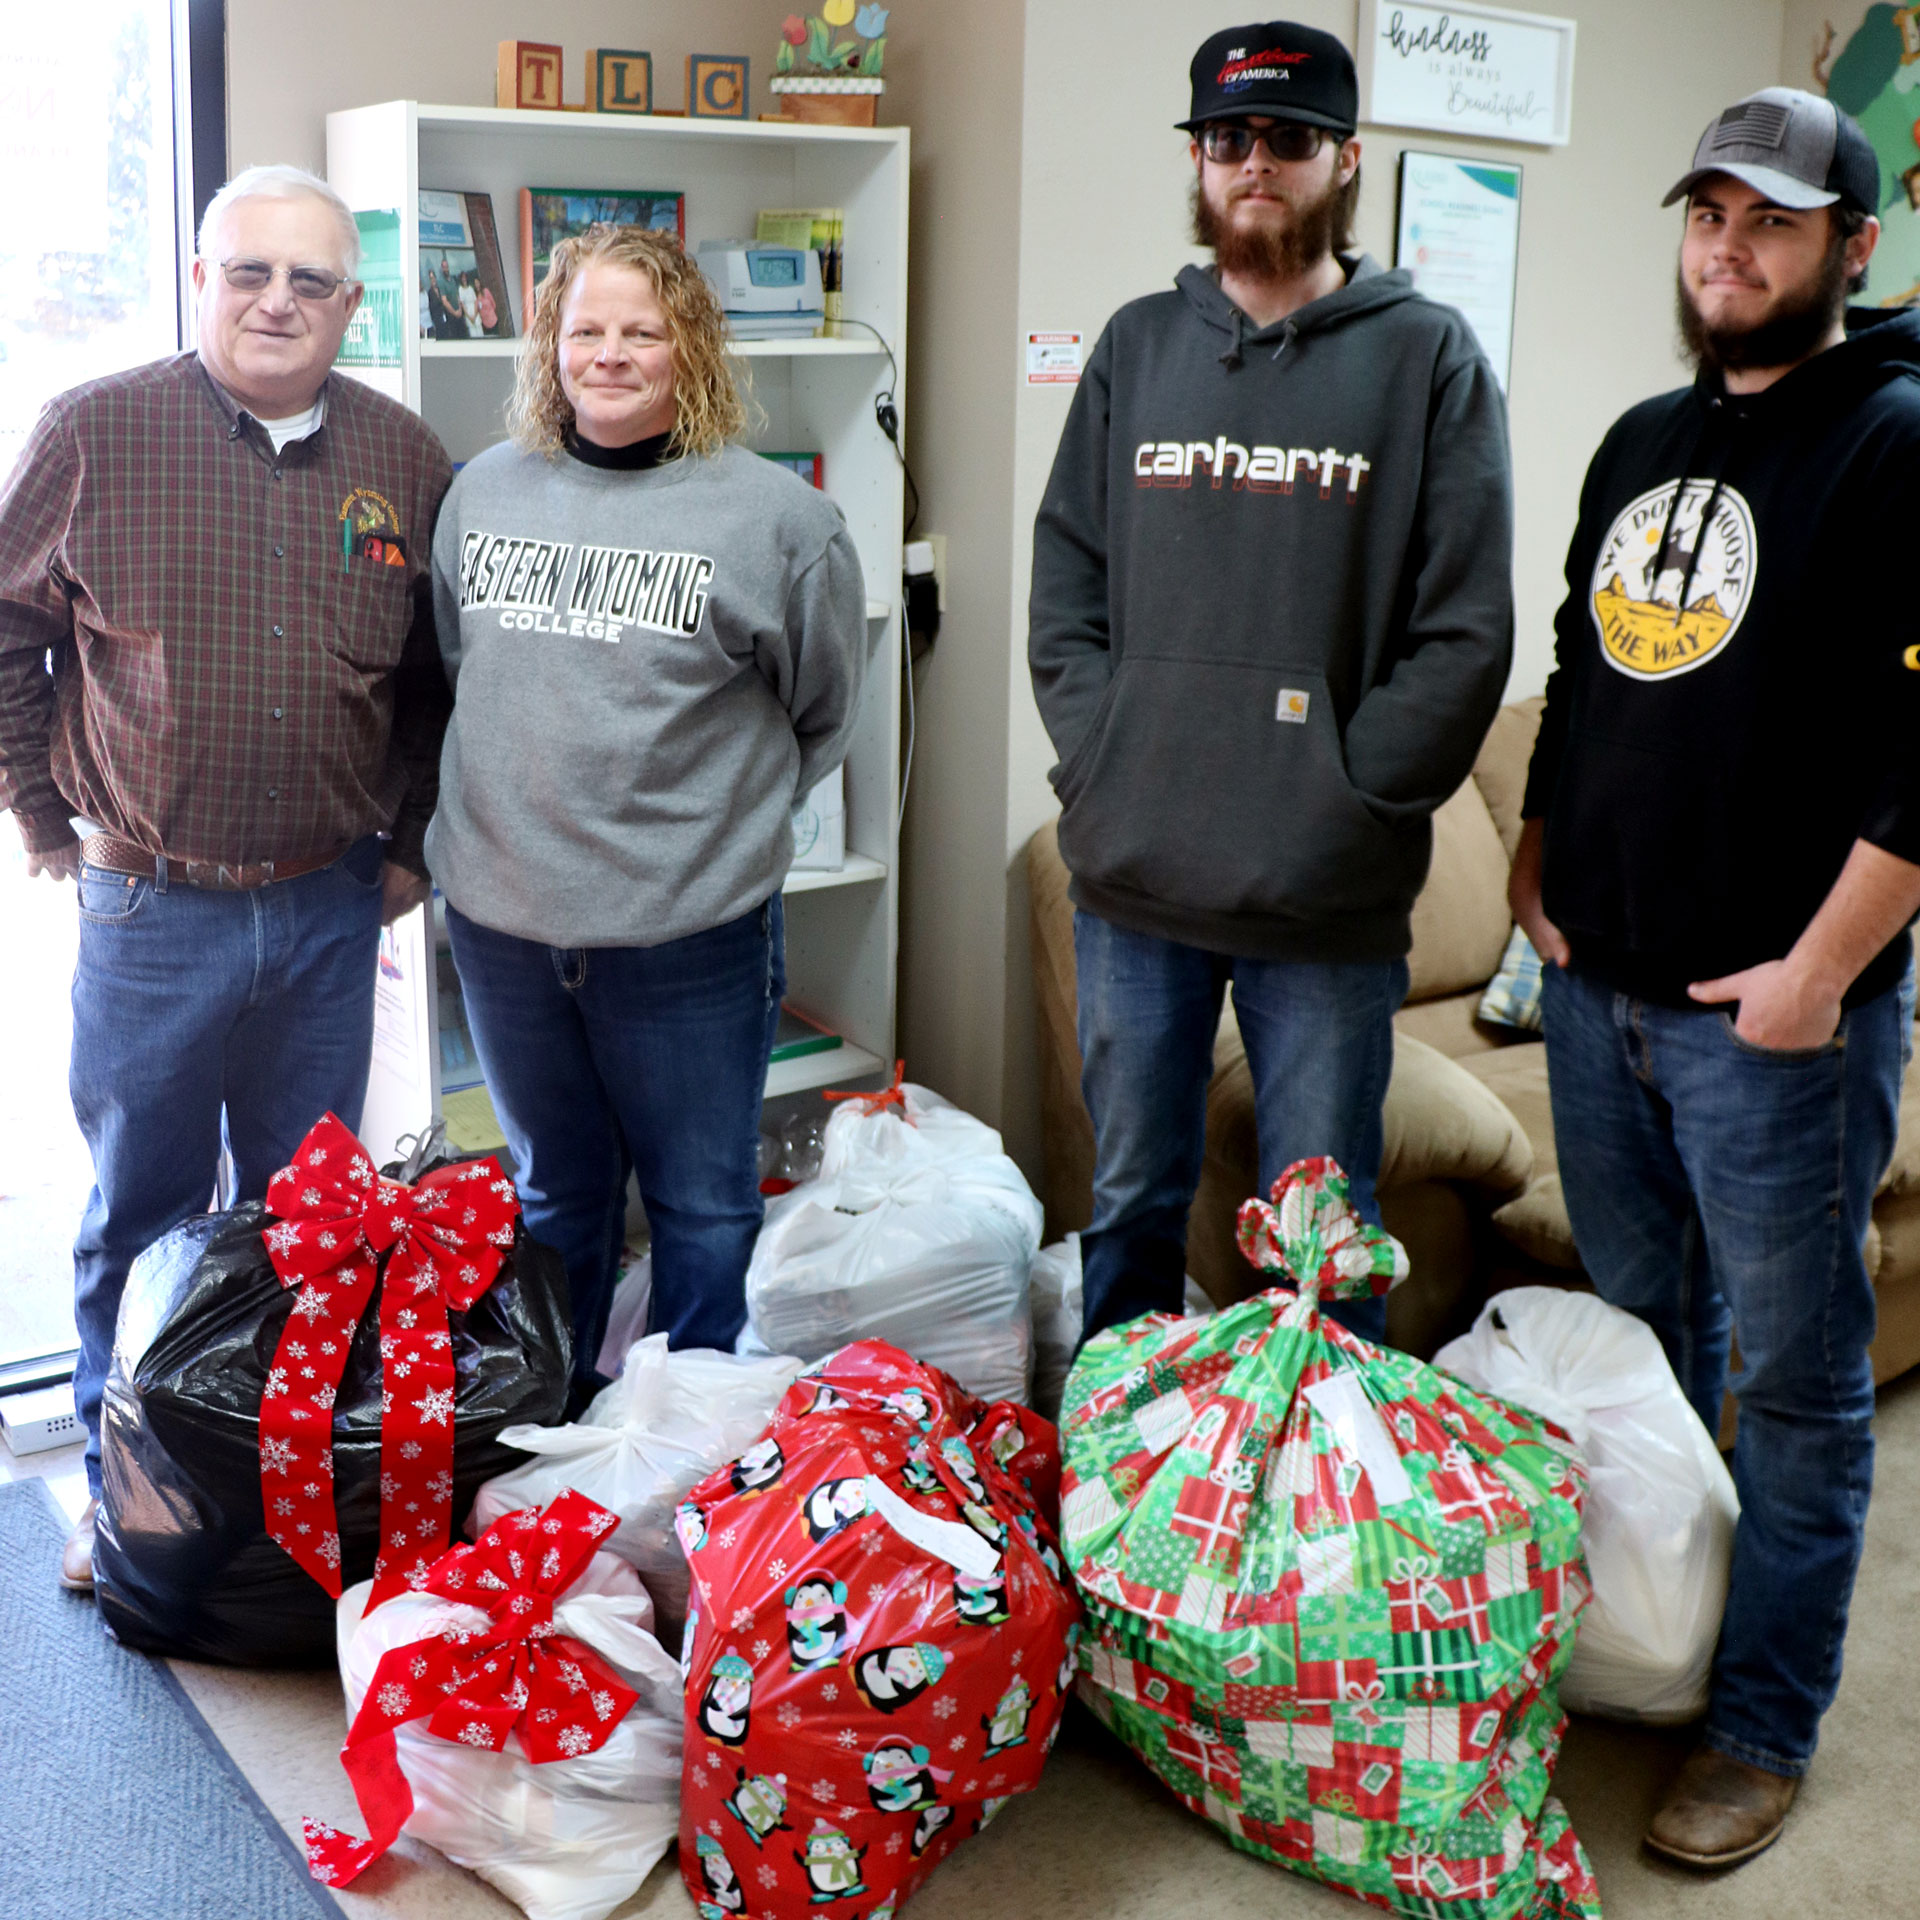 EWC SkillsUSA members delivered bags of toys, bears, and blankets to the Torrington Learning Center (TLC). Left to right: Stan Nicolls, Kim Russell, sponsors, SkillsUSA members Reece Cook, and Dylan Offutt.